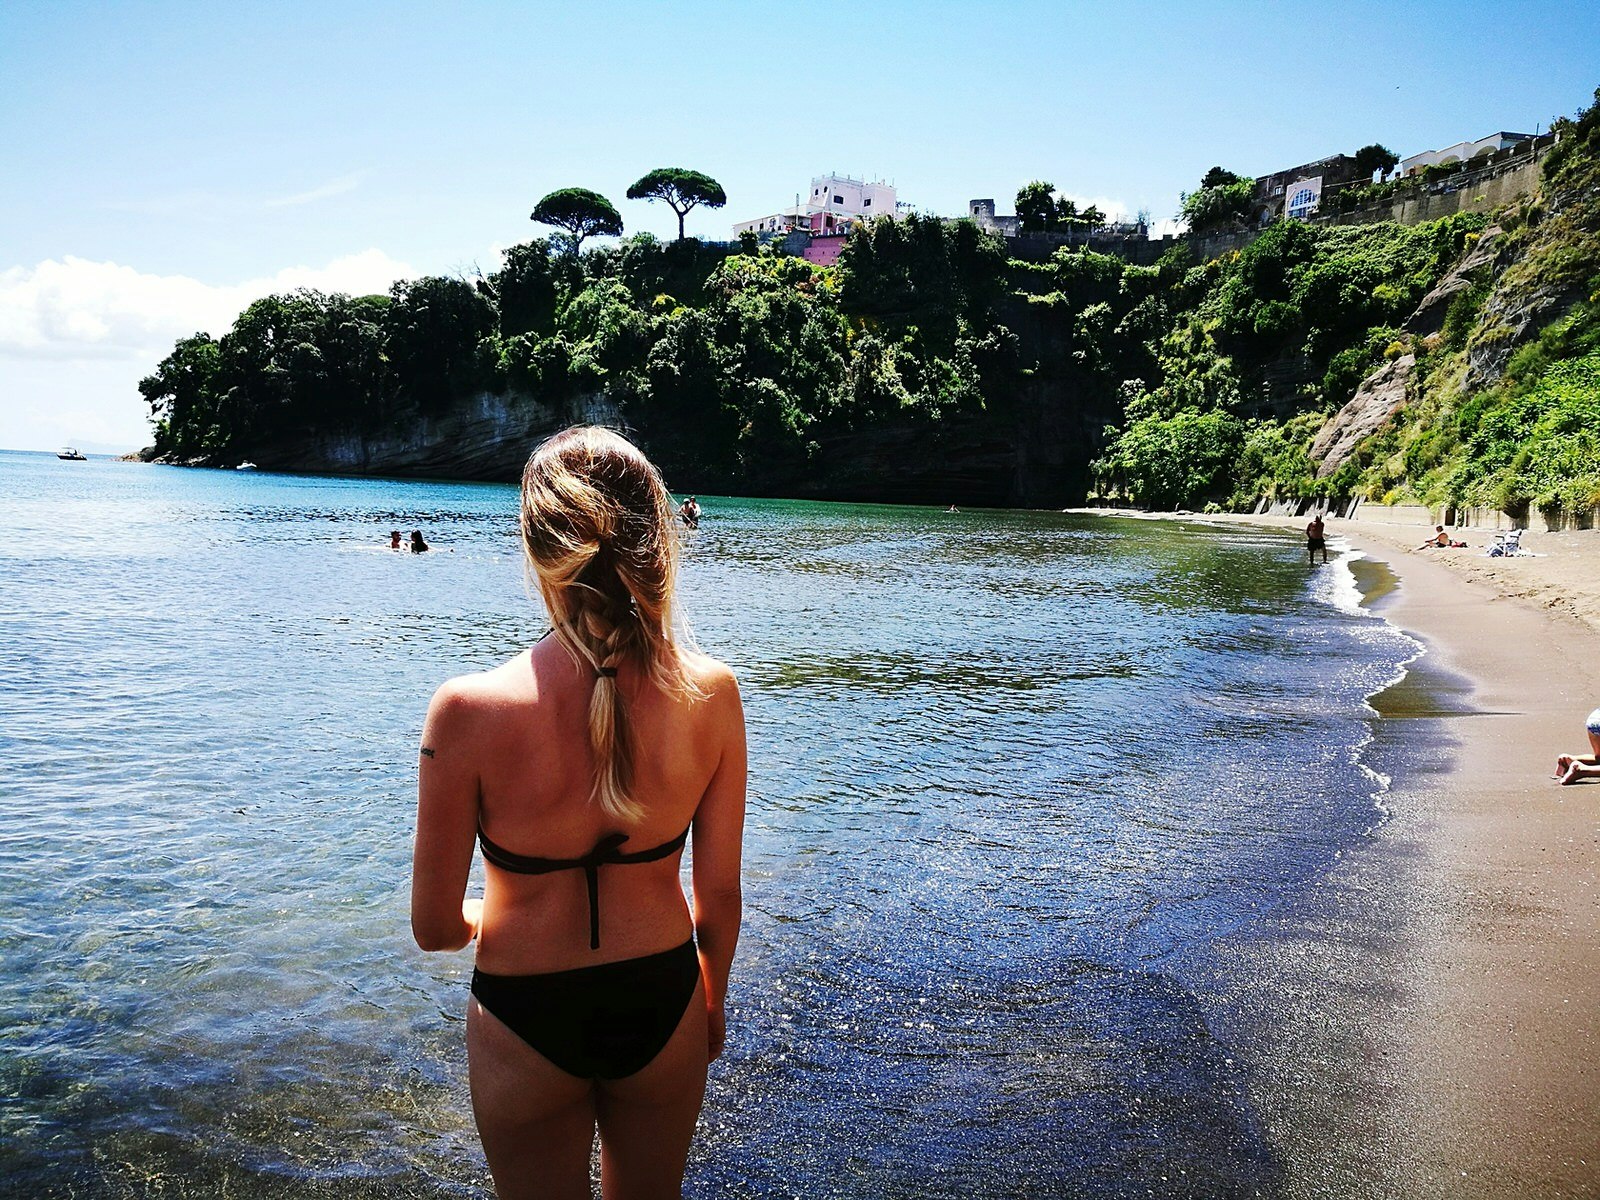 The rear view of a woman in a bikini facing the calm sea, with the beach arching out to her right; at the end of the beach are rocky cliffs topped by verdant forest.